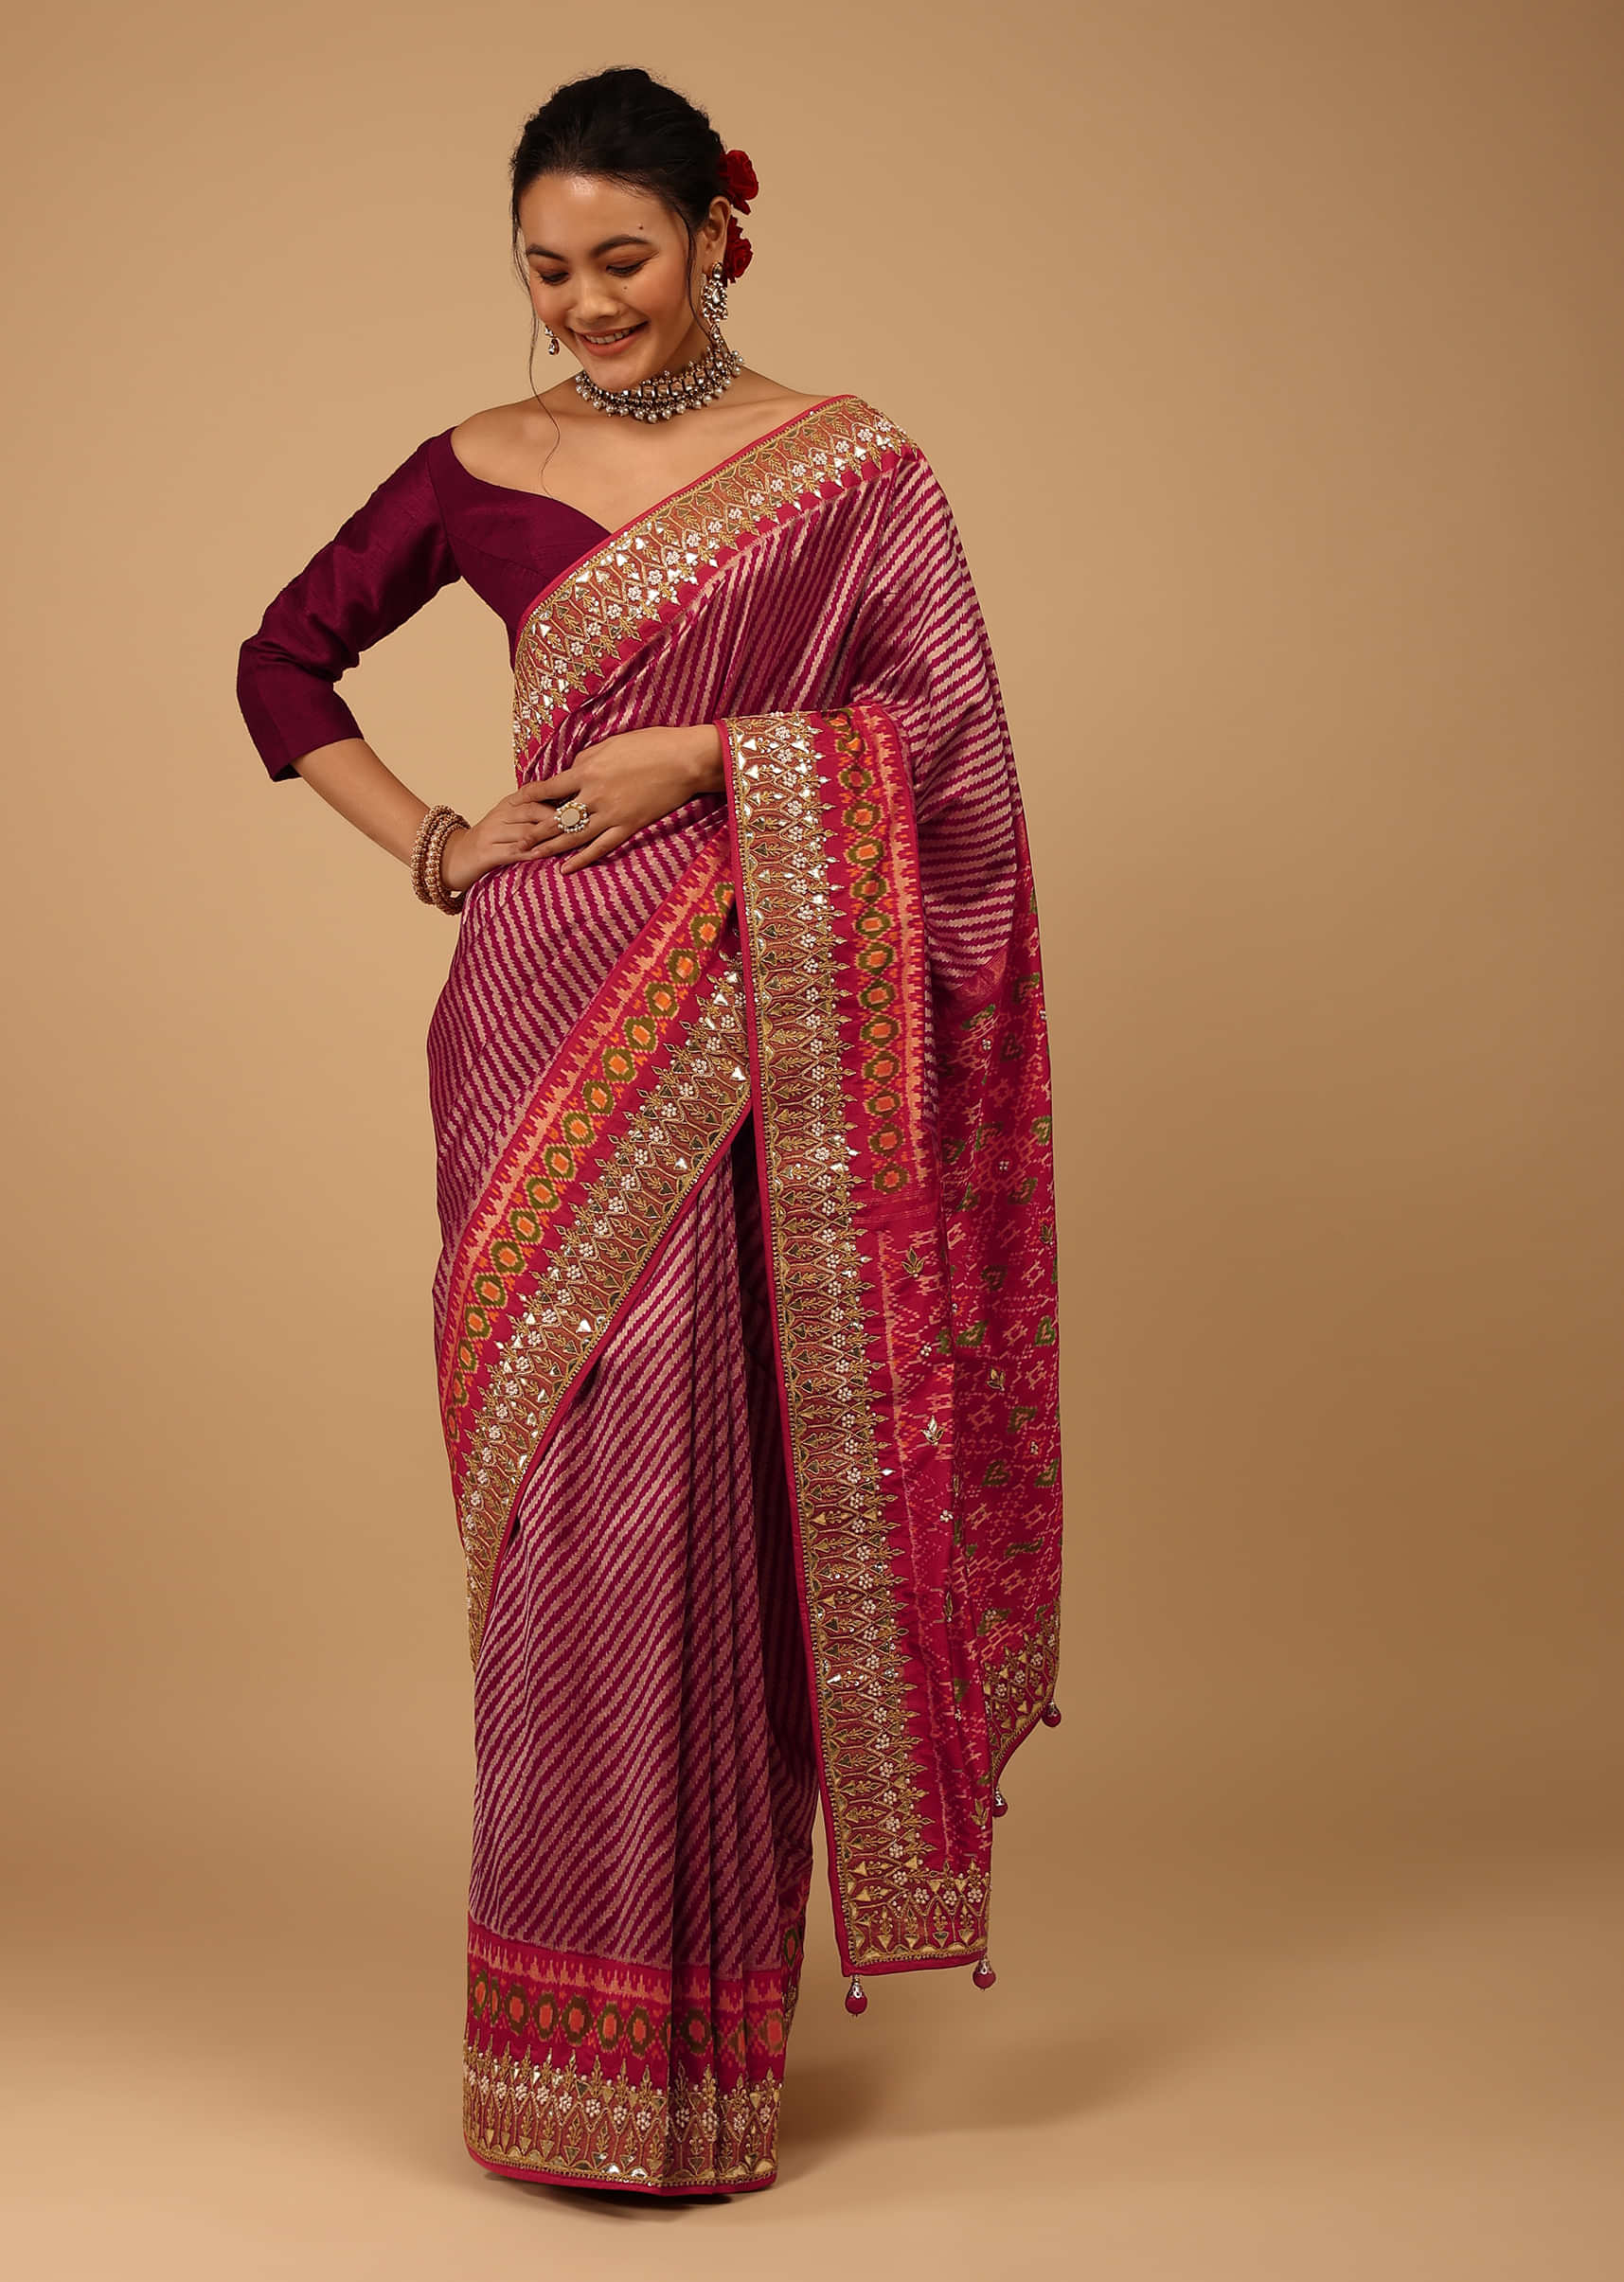 Multi-Color Saree In Pure Silk With Handloom Patola Ikat Weave